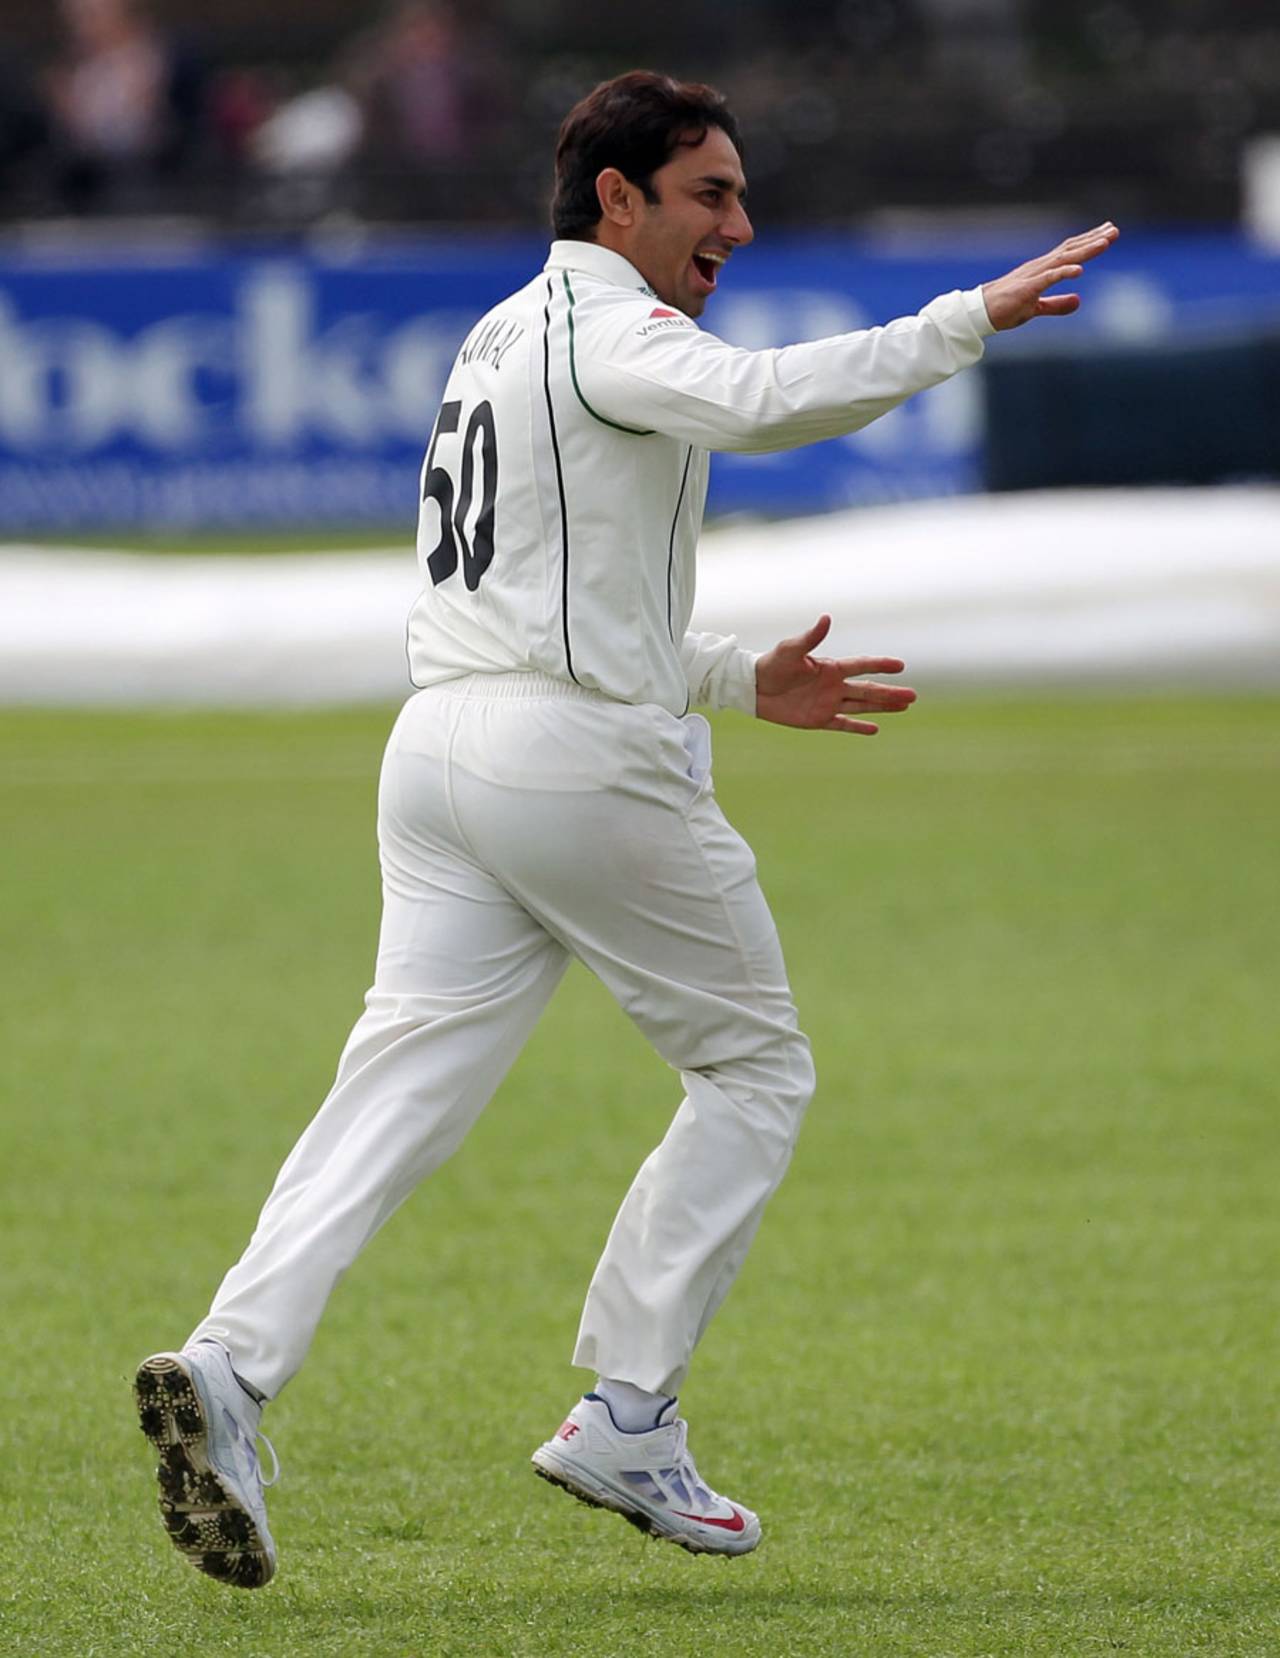 Ajmal shouldn't hold his breath waiting for an explanation or apology over Stuart Broad's comments&nbsp;&nbsp;&bull;&nbsp;&nbsp;PA Photos